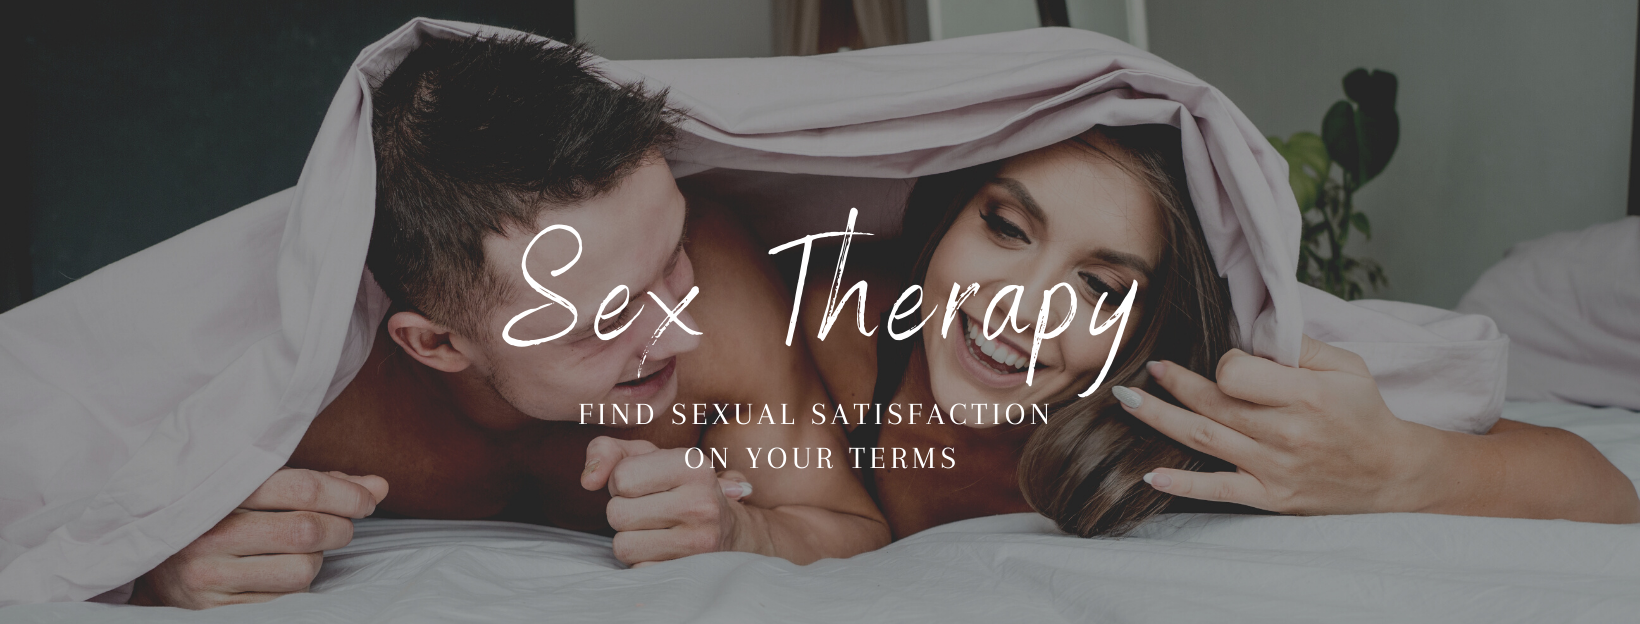 sex counseling married couples